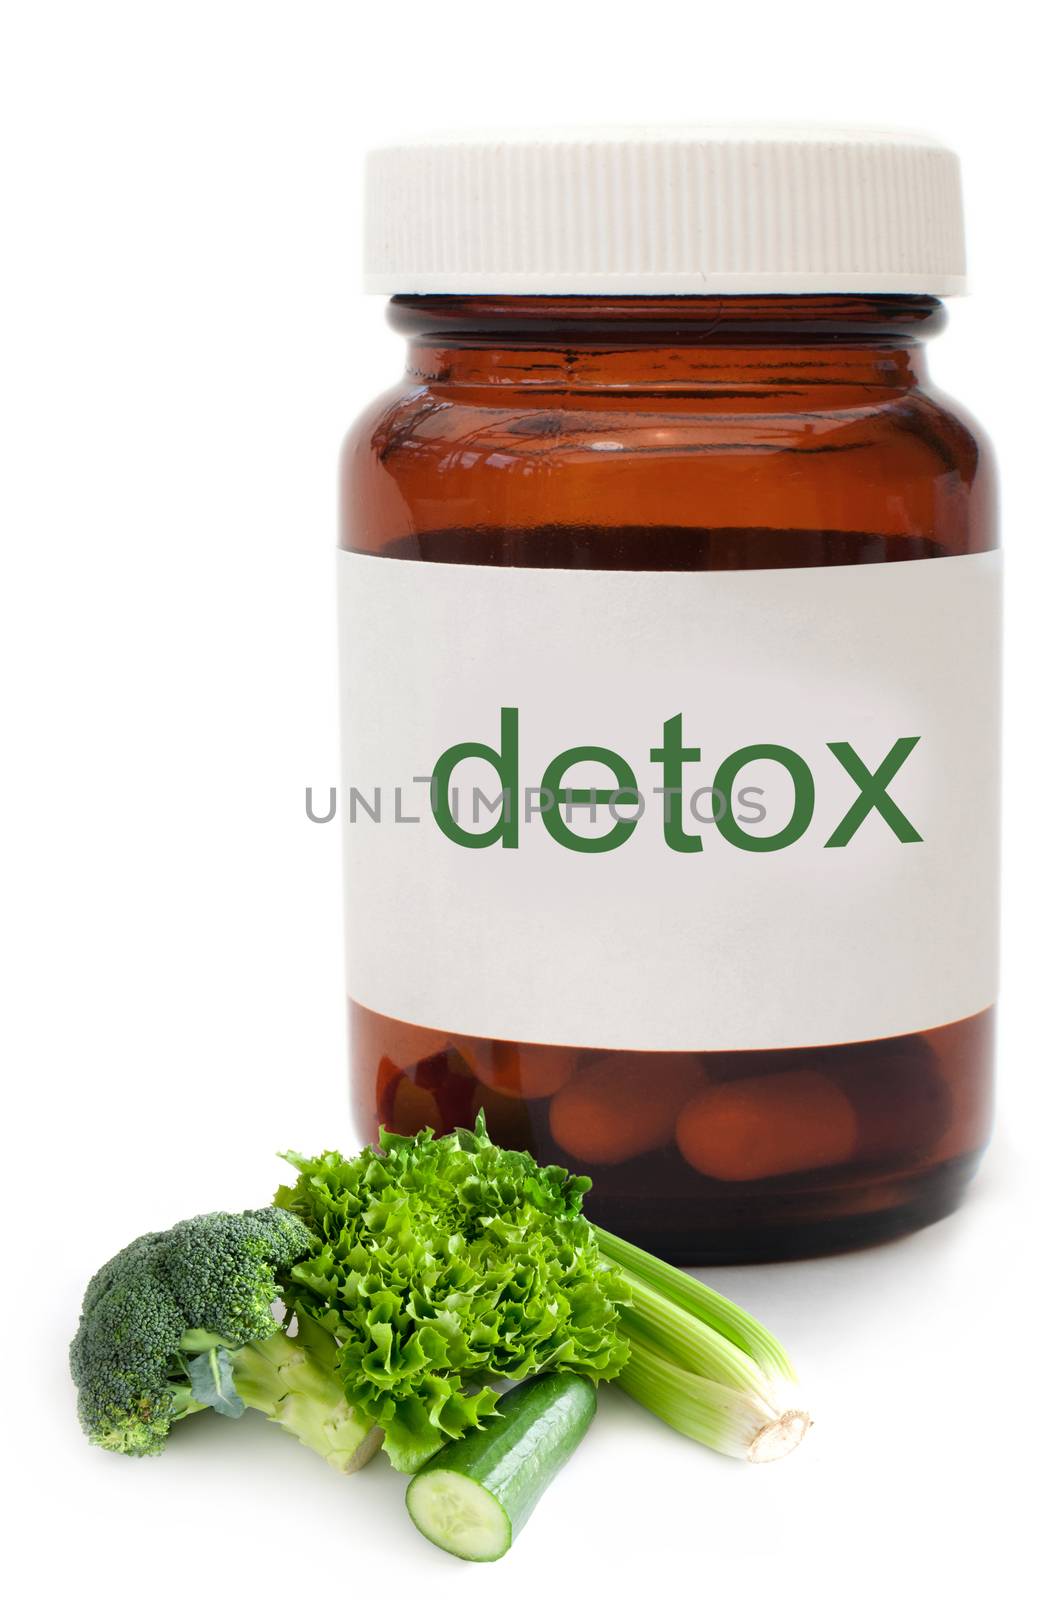 Medicine jar with detox pills and vegetables over a white background